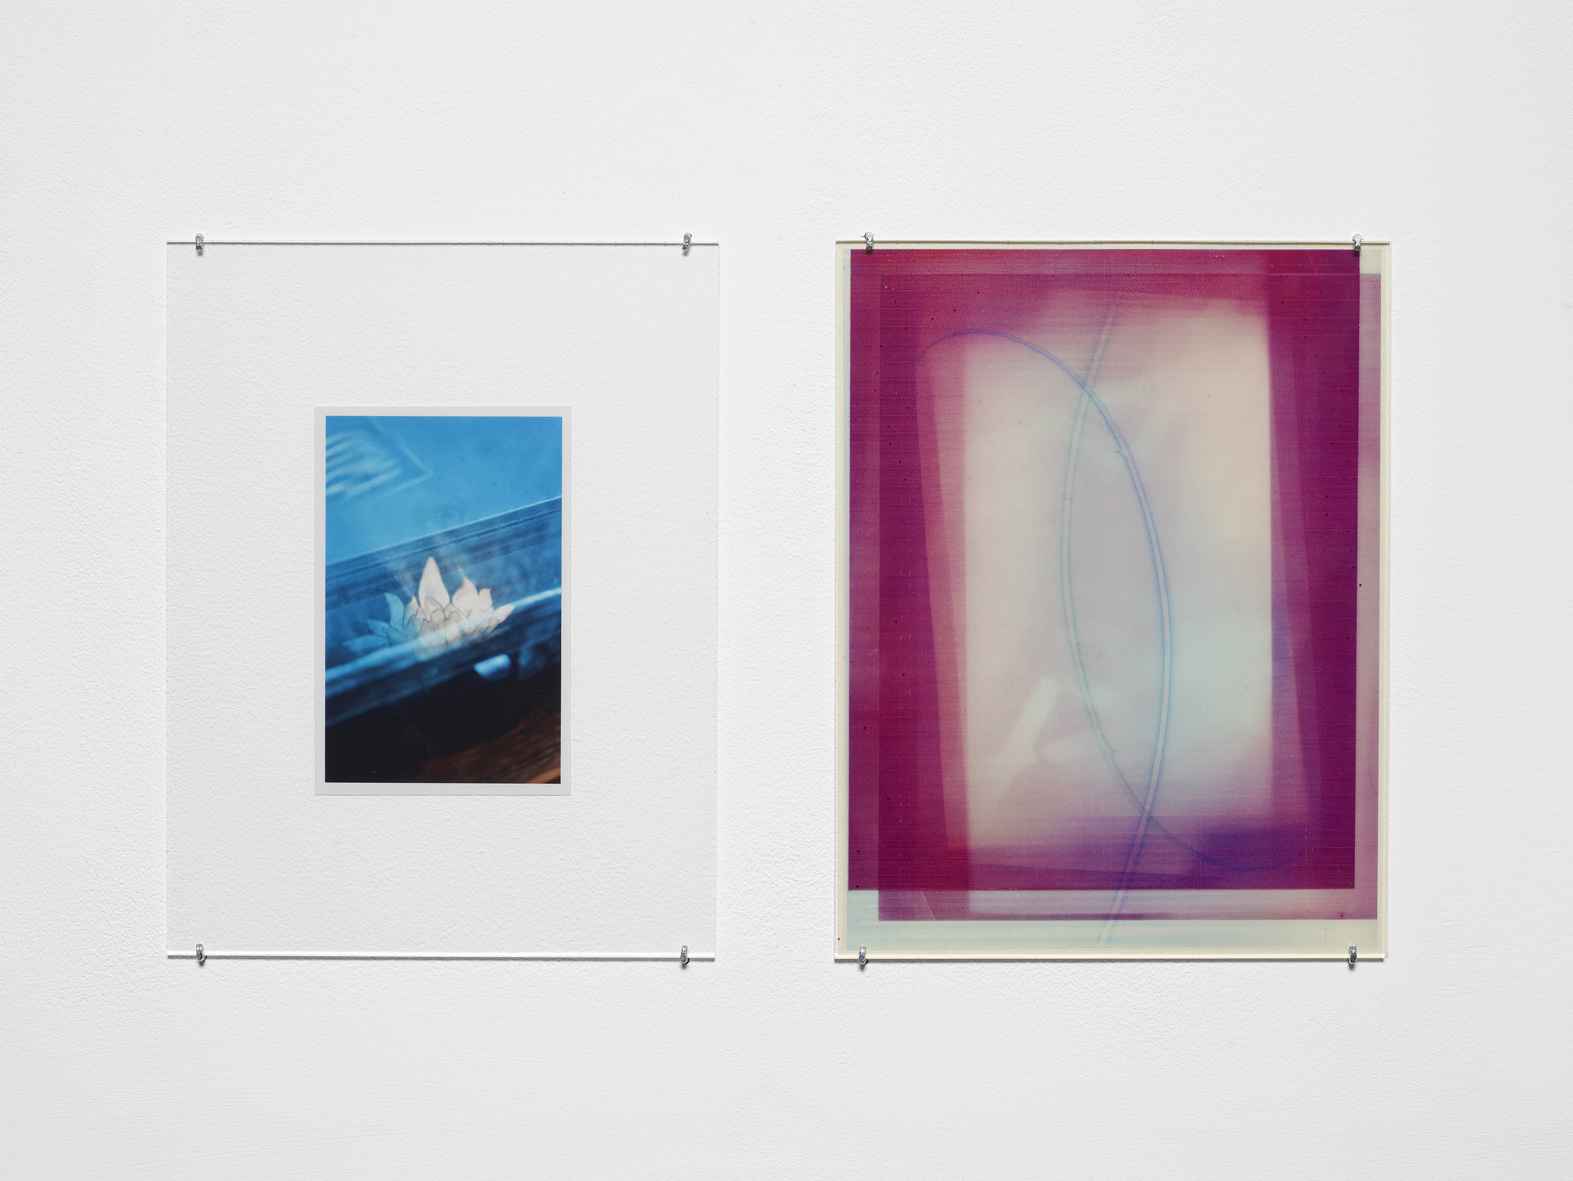     Untitled 2015 Unique C-print, inkjet print, inkjet print on transparency, non-reflective perspex, L shaped pins&nbsp; 2 parts, each: 27.9 x 21.5 cm / 11 x 8.5 in 